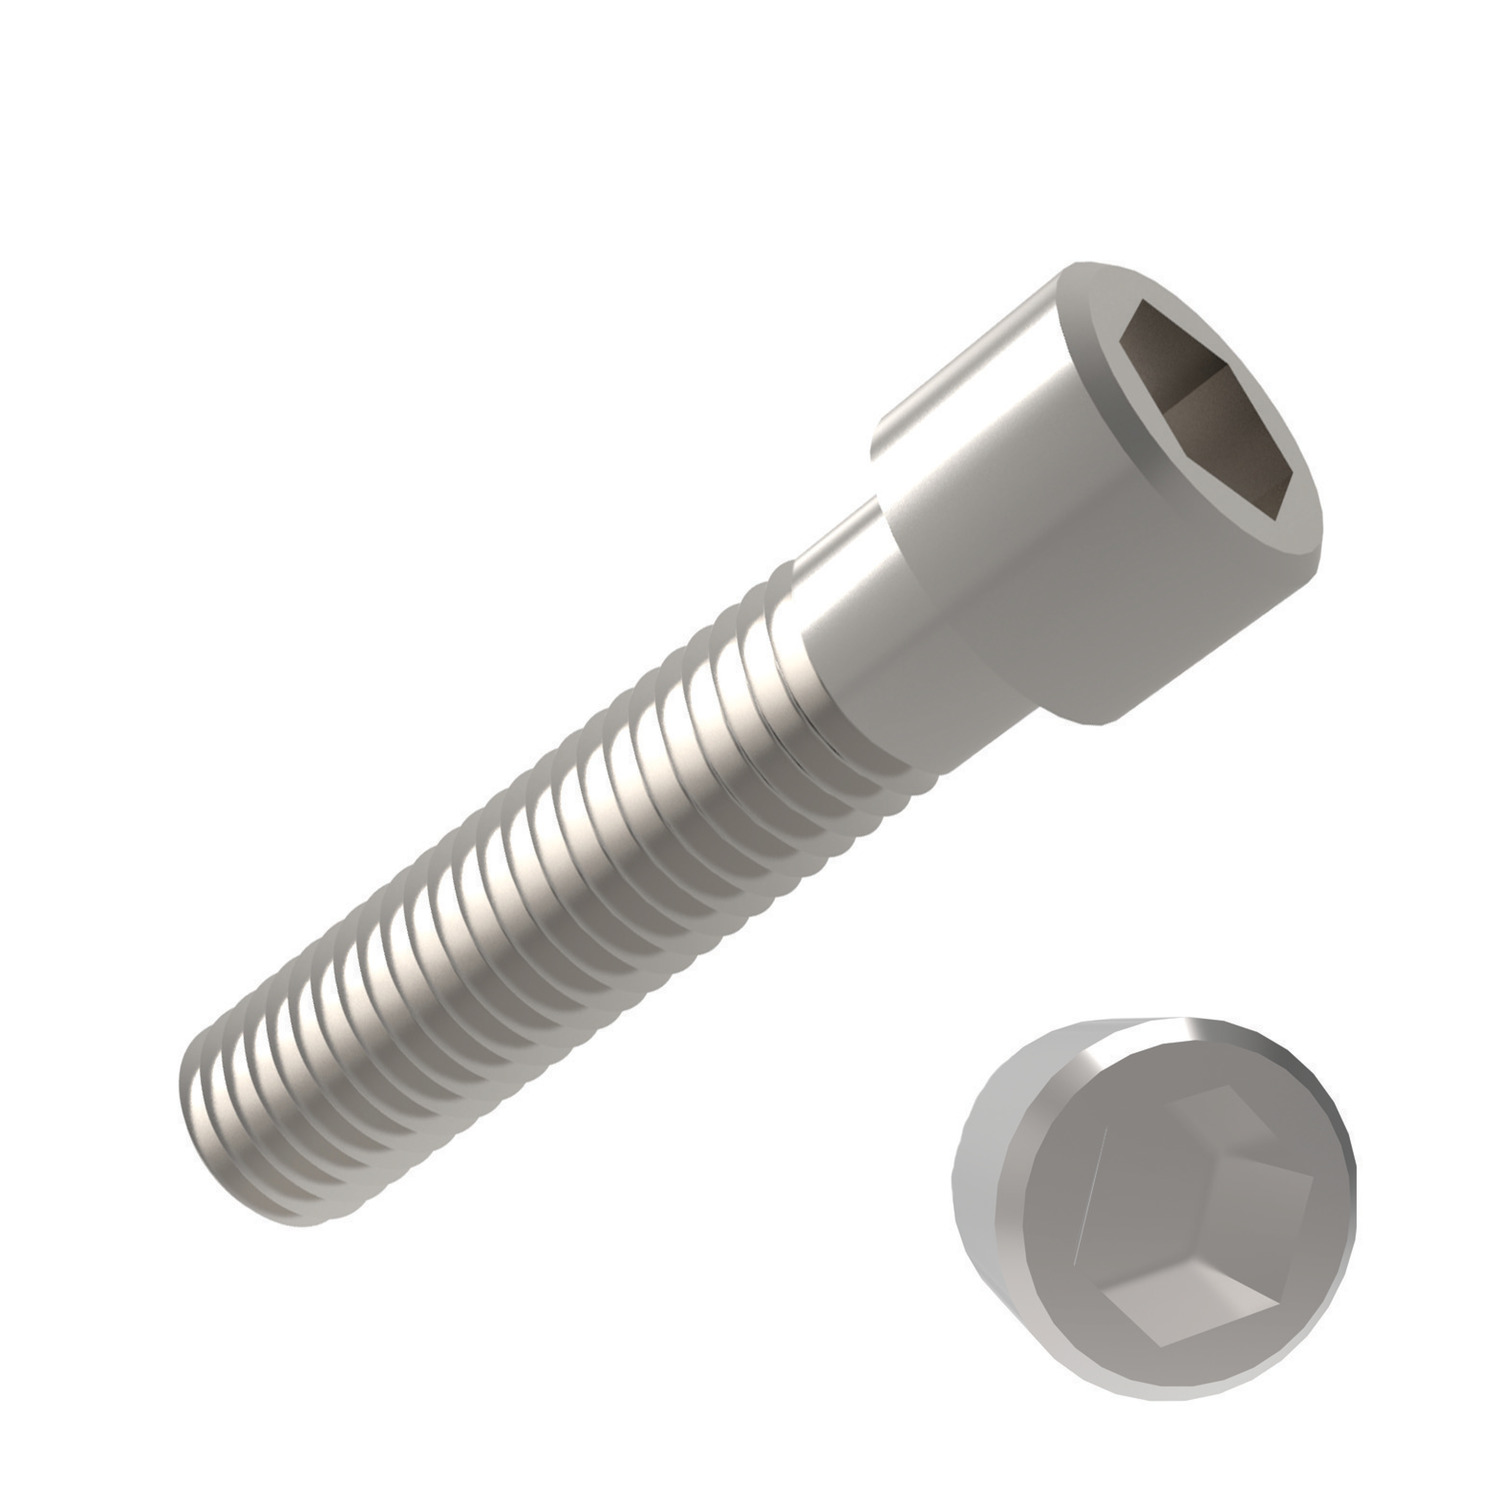 Socket Cap Screws Stainless Steel A2. For the majority of screw lengths the threads goes all the way to the head of the screw (i.e. l1= l2) less 2.5 thread pitches.